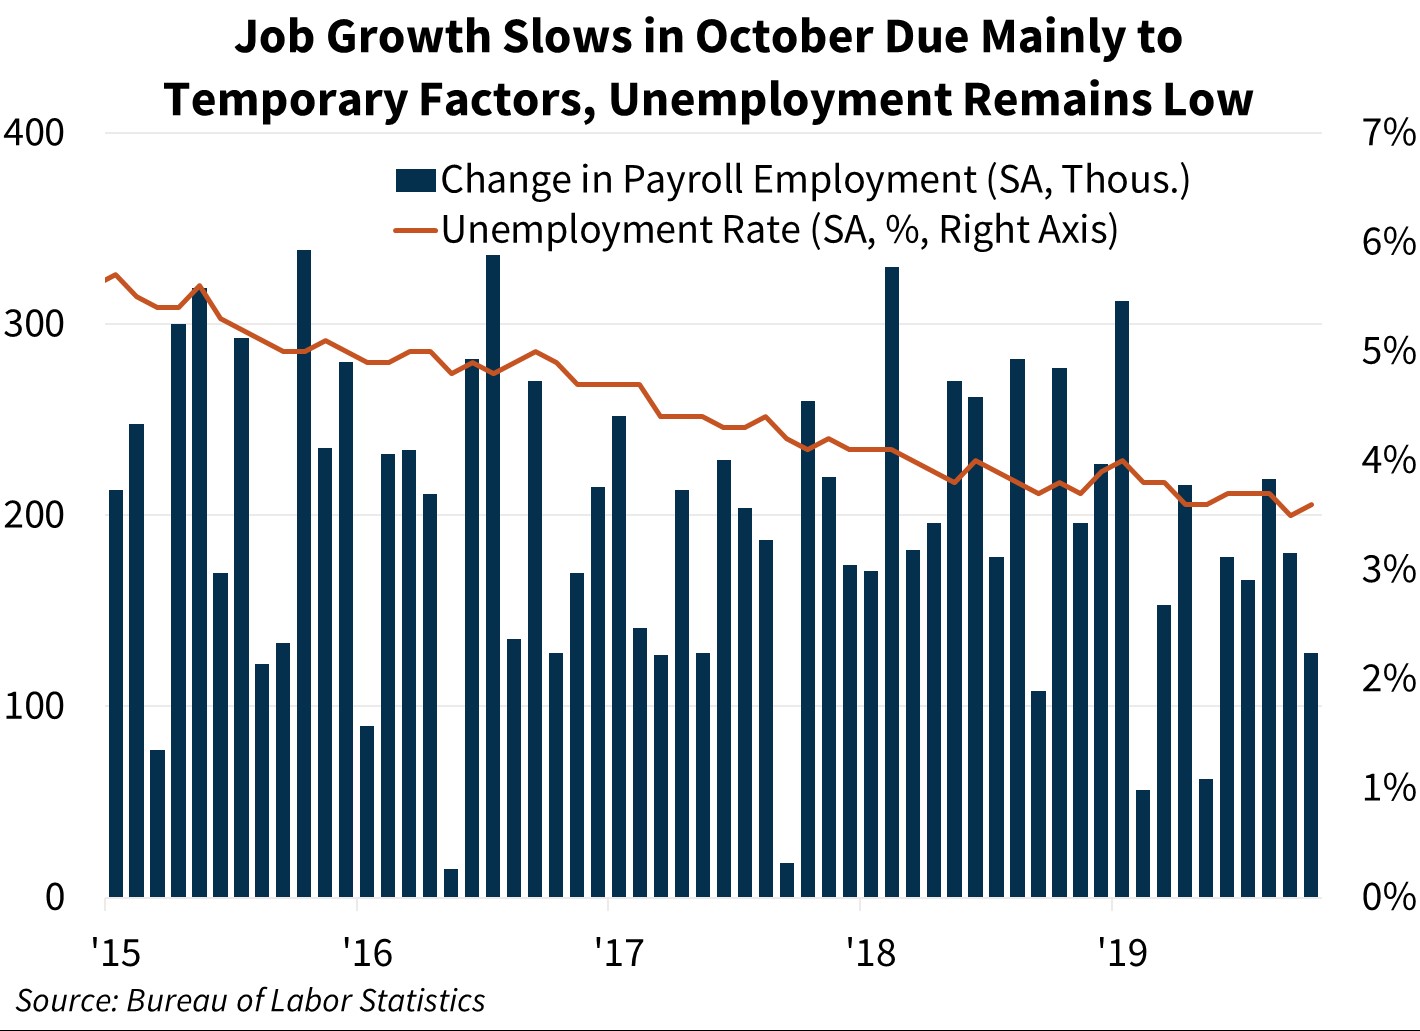 Job Growth Slows in October Due Mainly to Temporary Factors